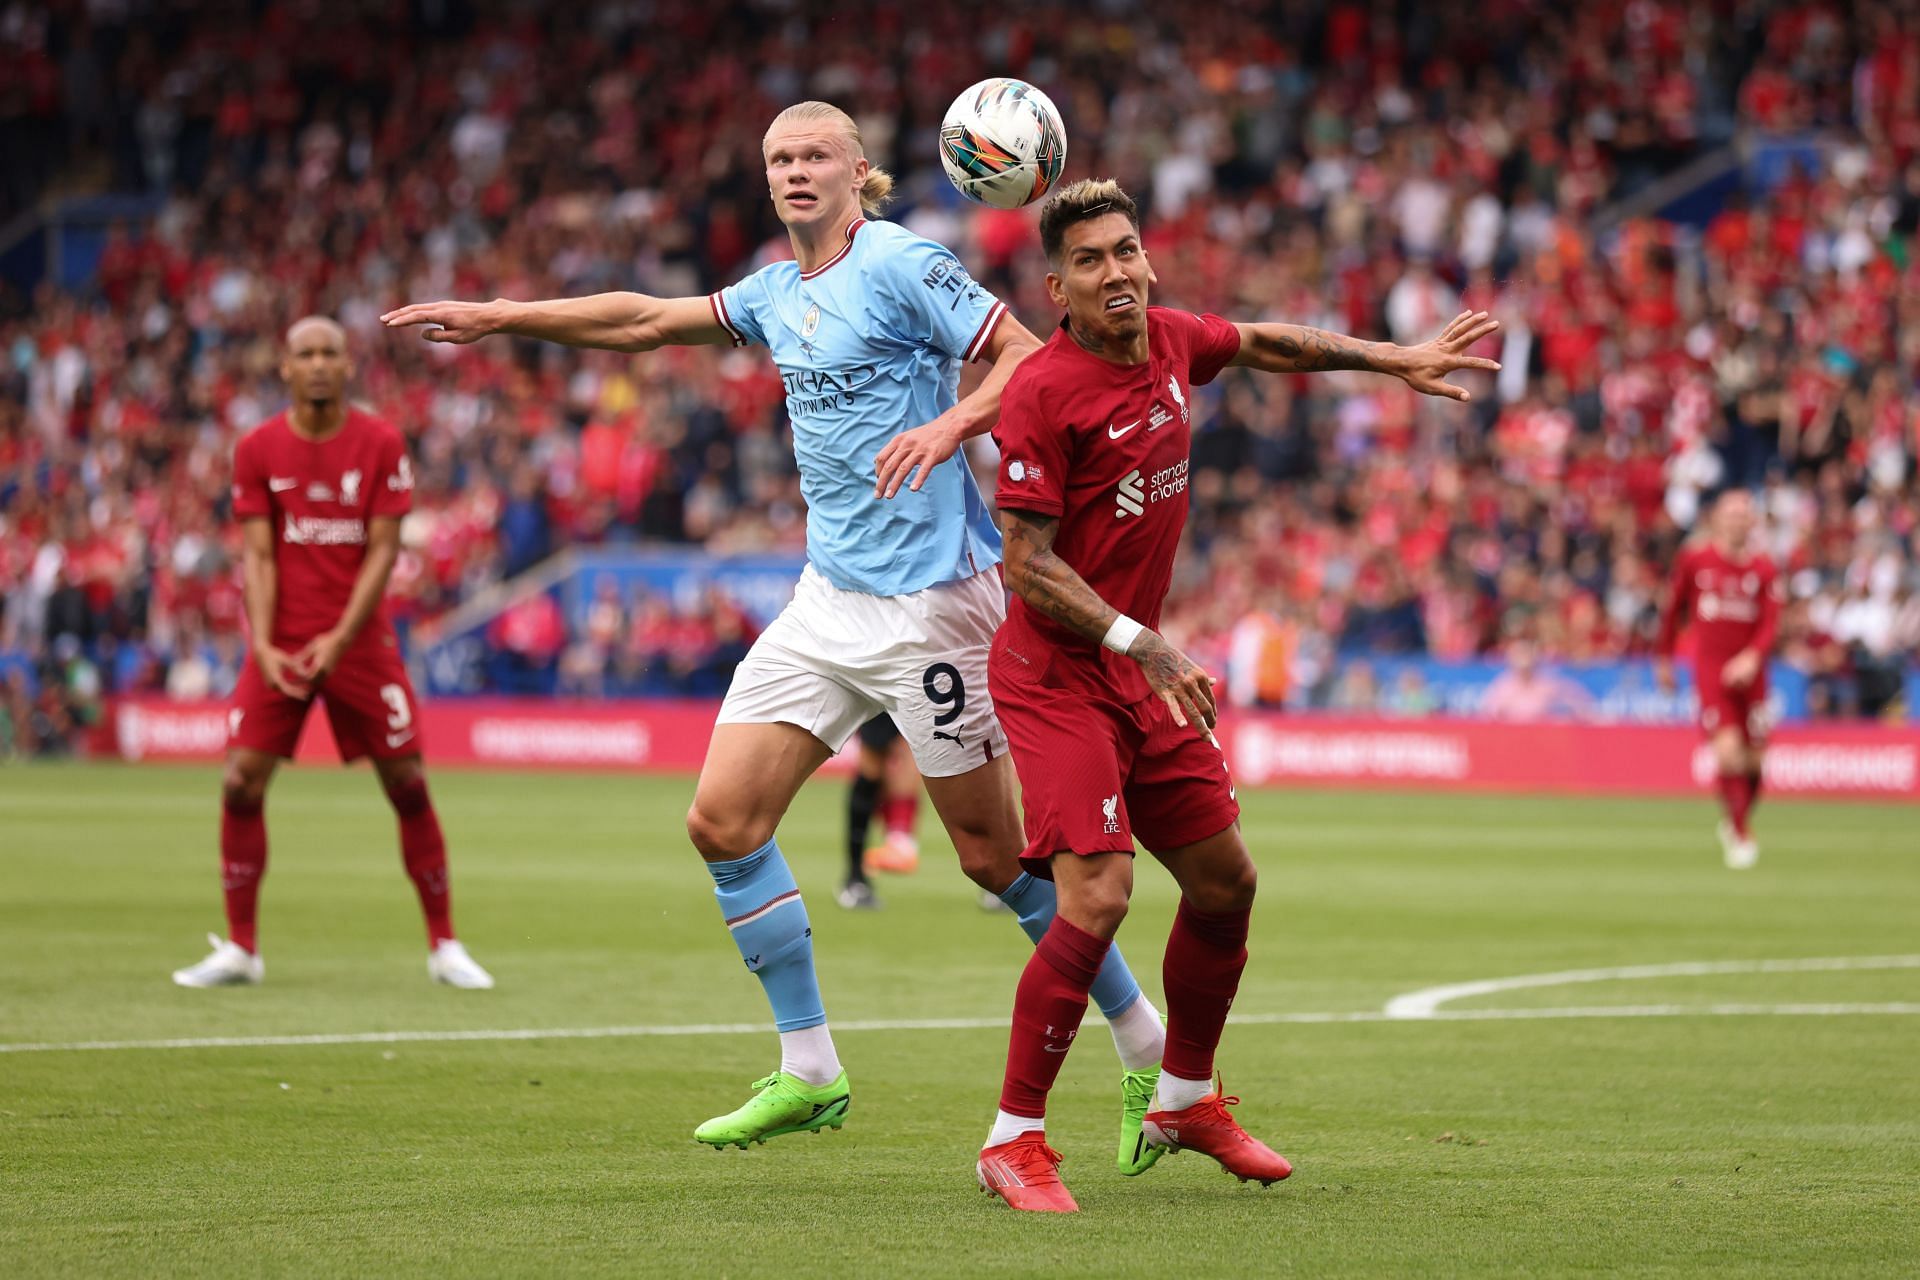 Haaland provides Manchester City with a focal point in attack